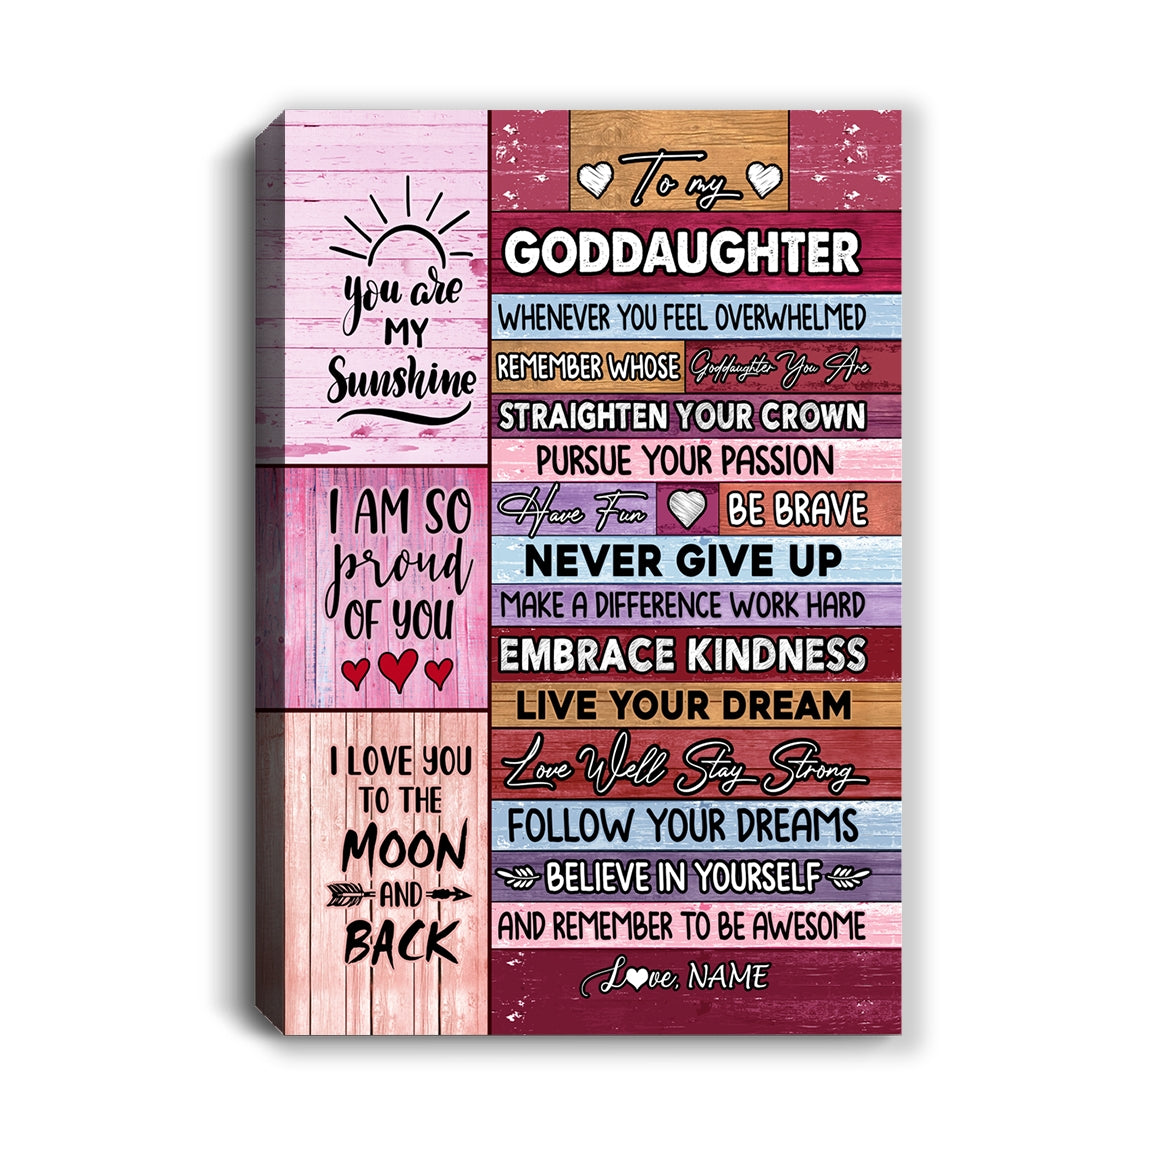 Personalized_To_My_Goddaughter_Canvas_From_Godmother_Believe_In_Yourself_Awesome_Pink_Wood_Goddaughter_Birthday_Graduation_Christmas_Custom_Wall_Art_Print_Framed_Canvas_Canvas_mockup-1.jpg